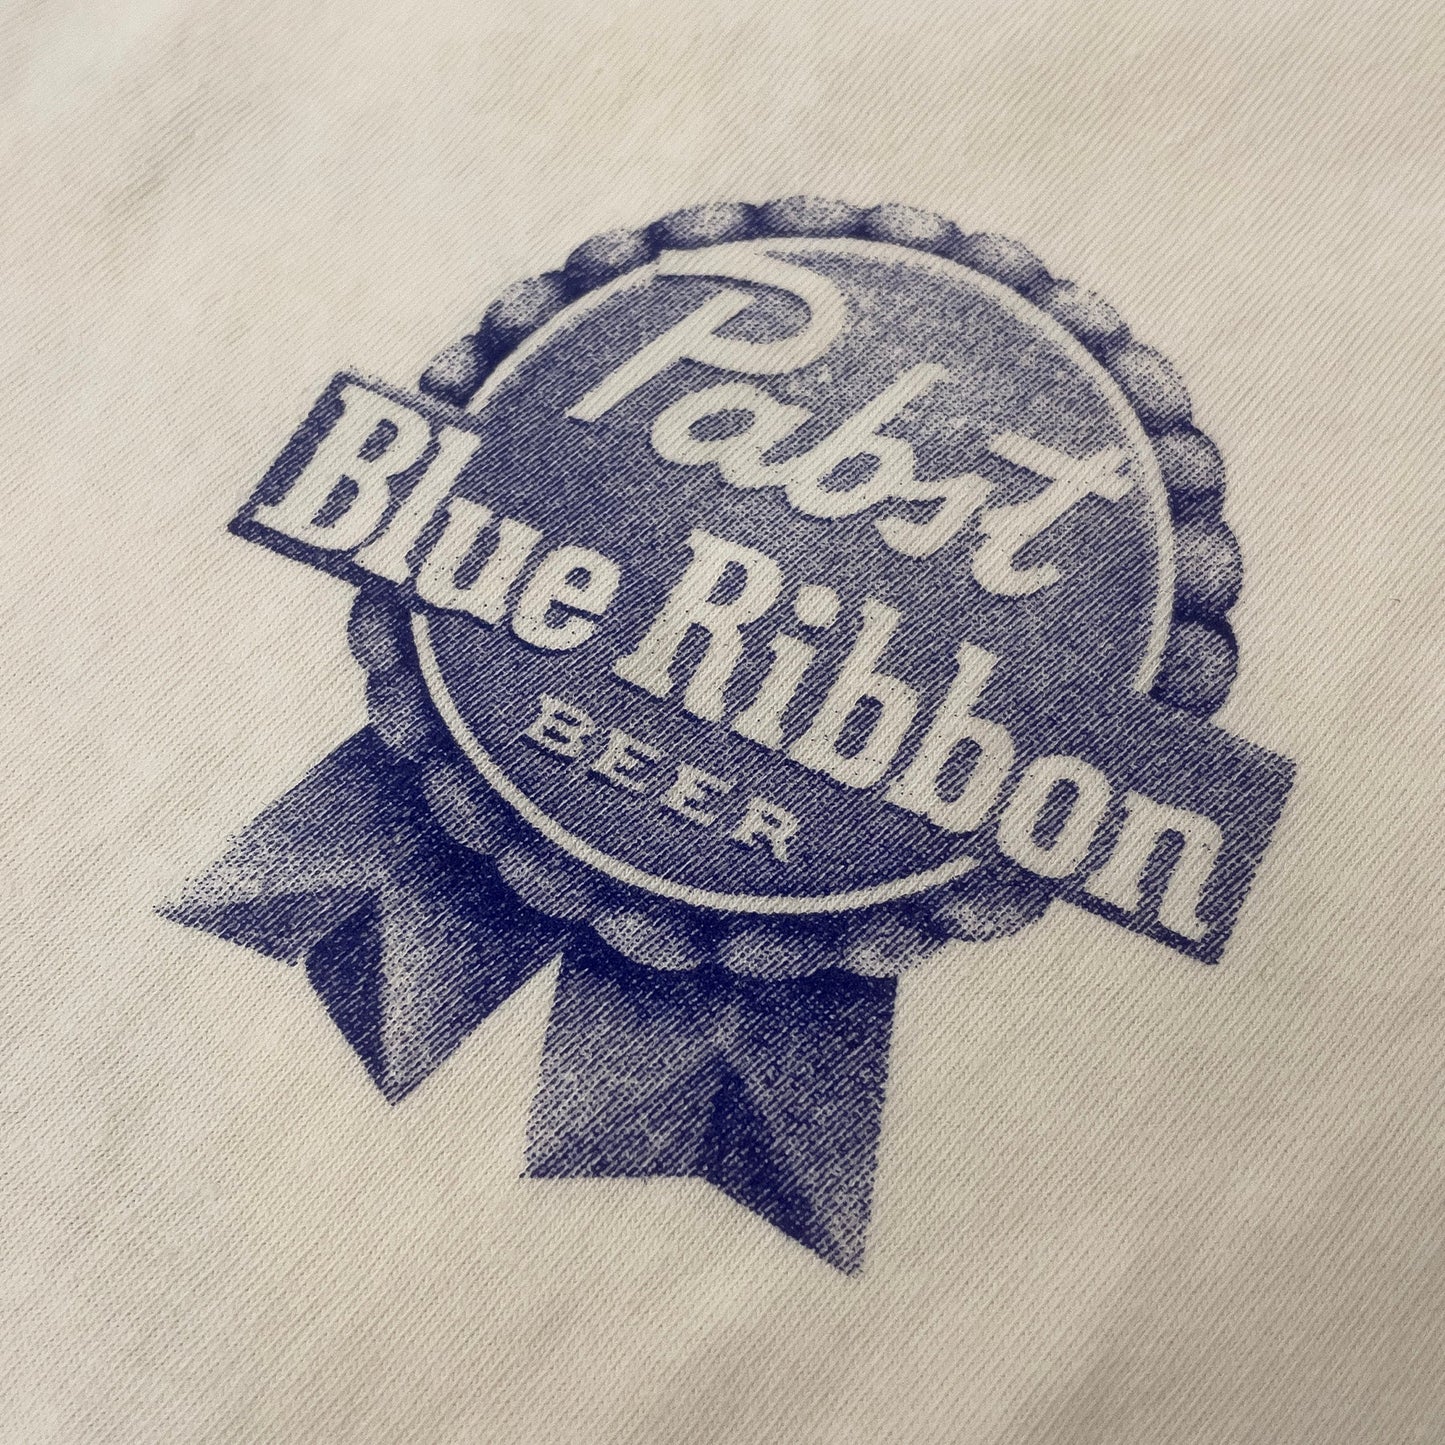 Koreatown x Andrew Pulig T-Shirt for Pabst Blue Ribbon